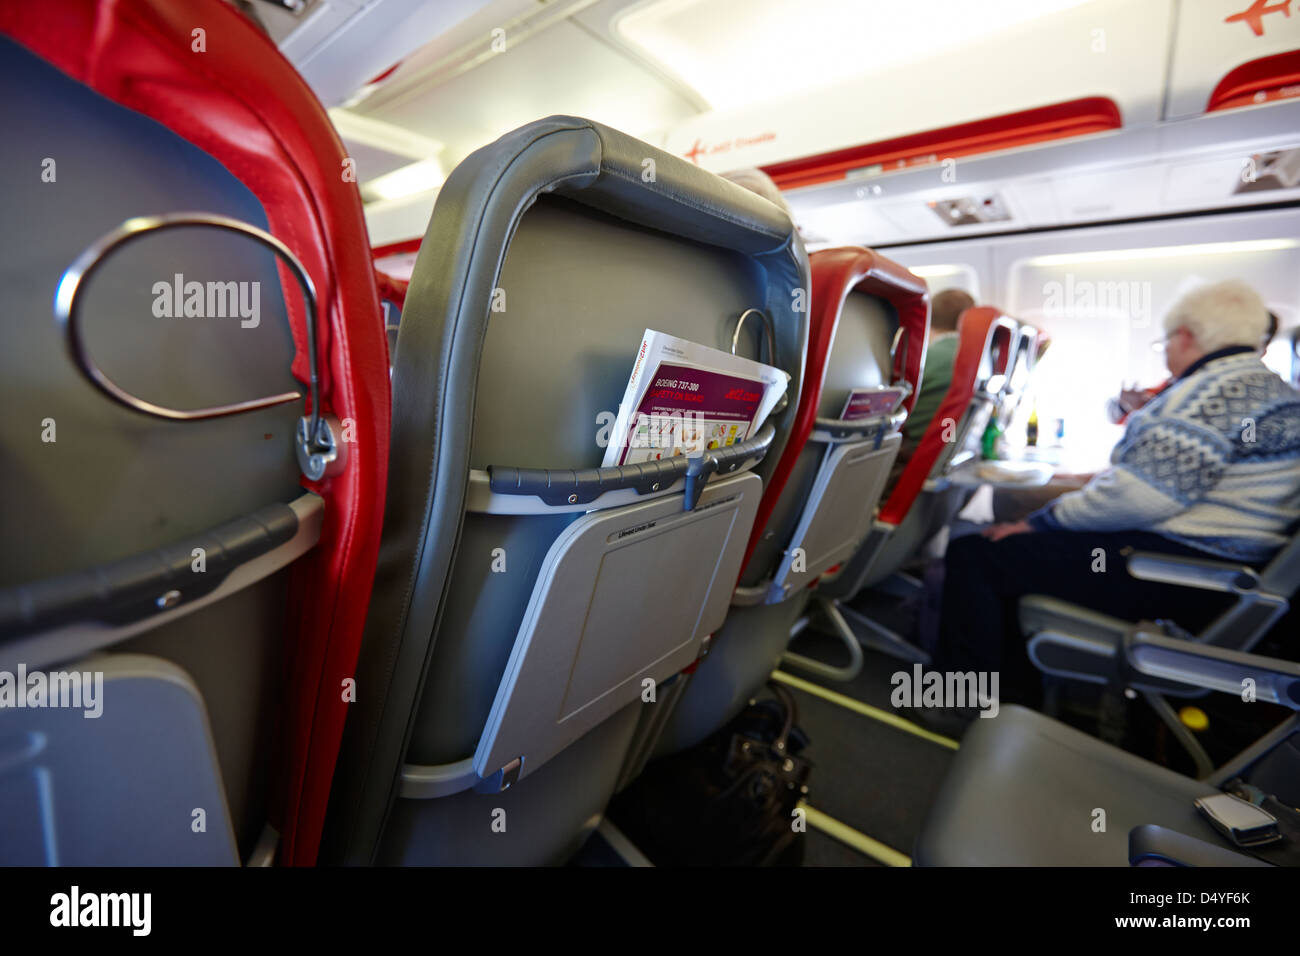 safety card and in flight magazine in seat pocket interior of jet2 aircraft passenger cabin in flight europe Stock Photo